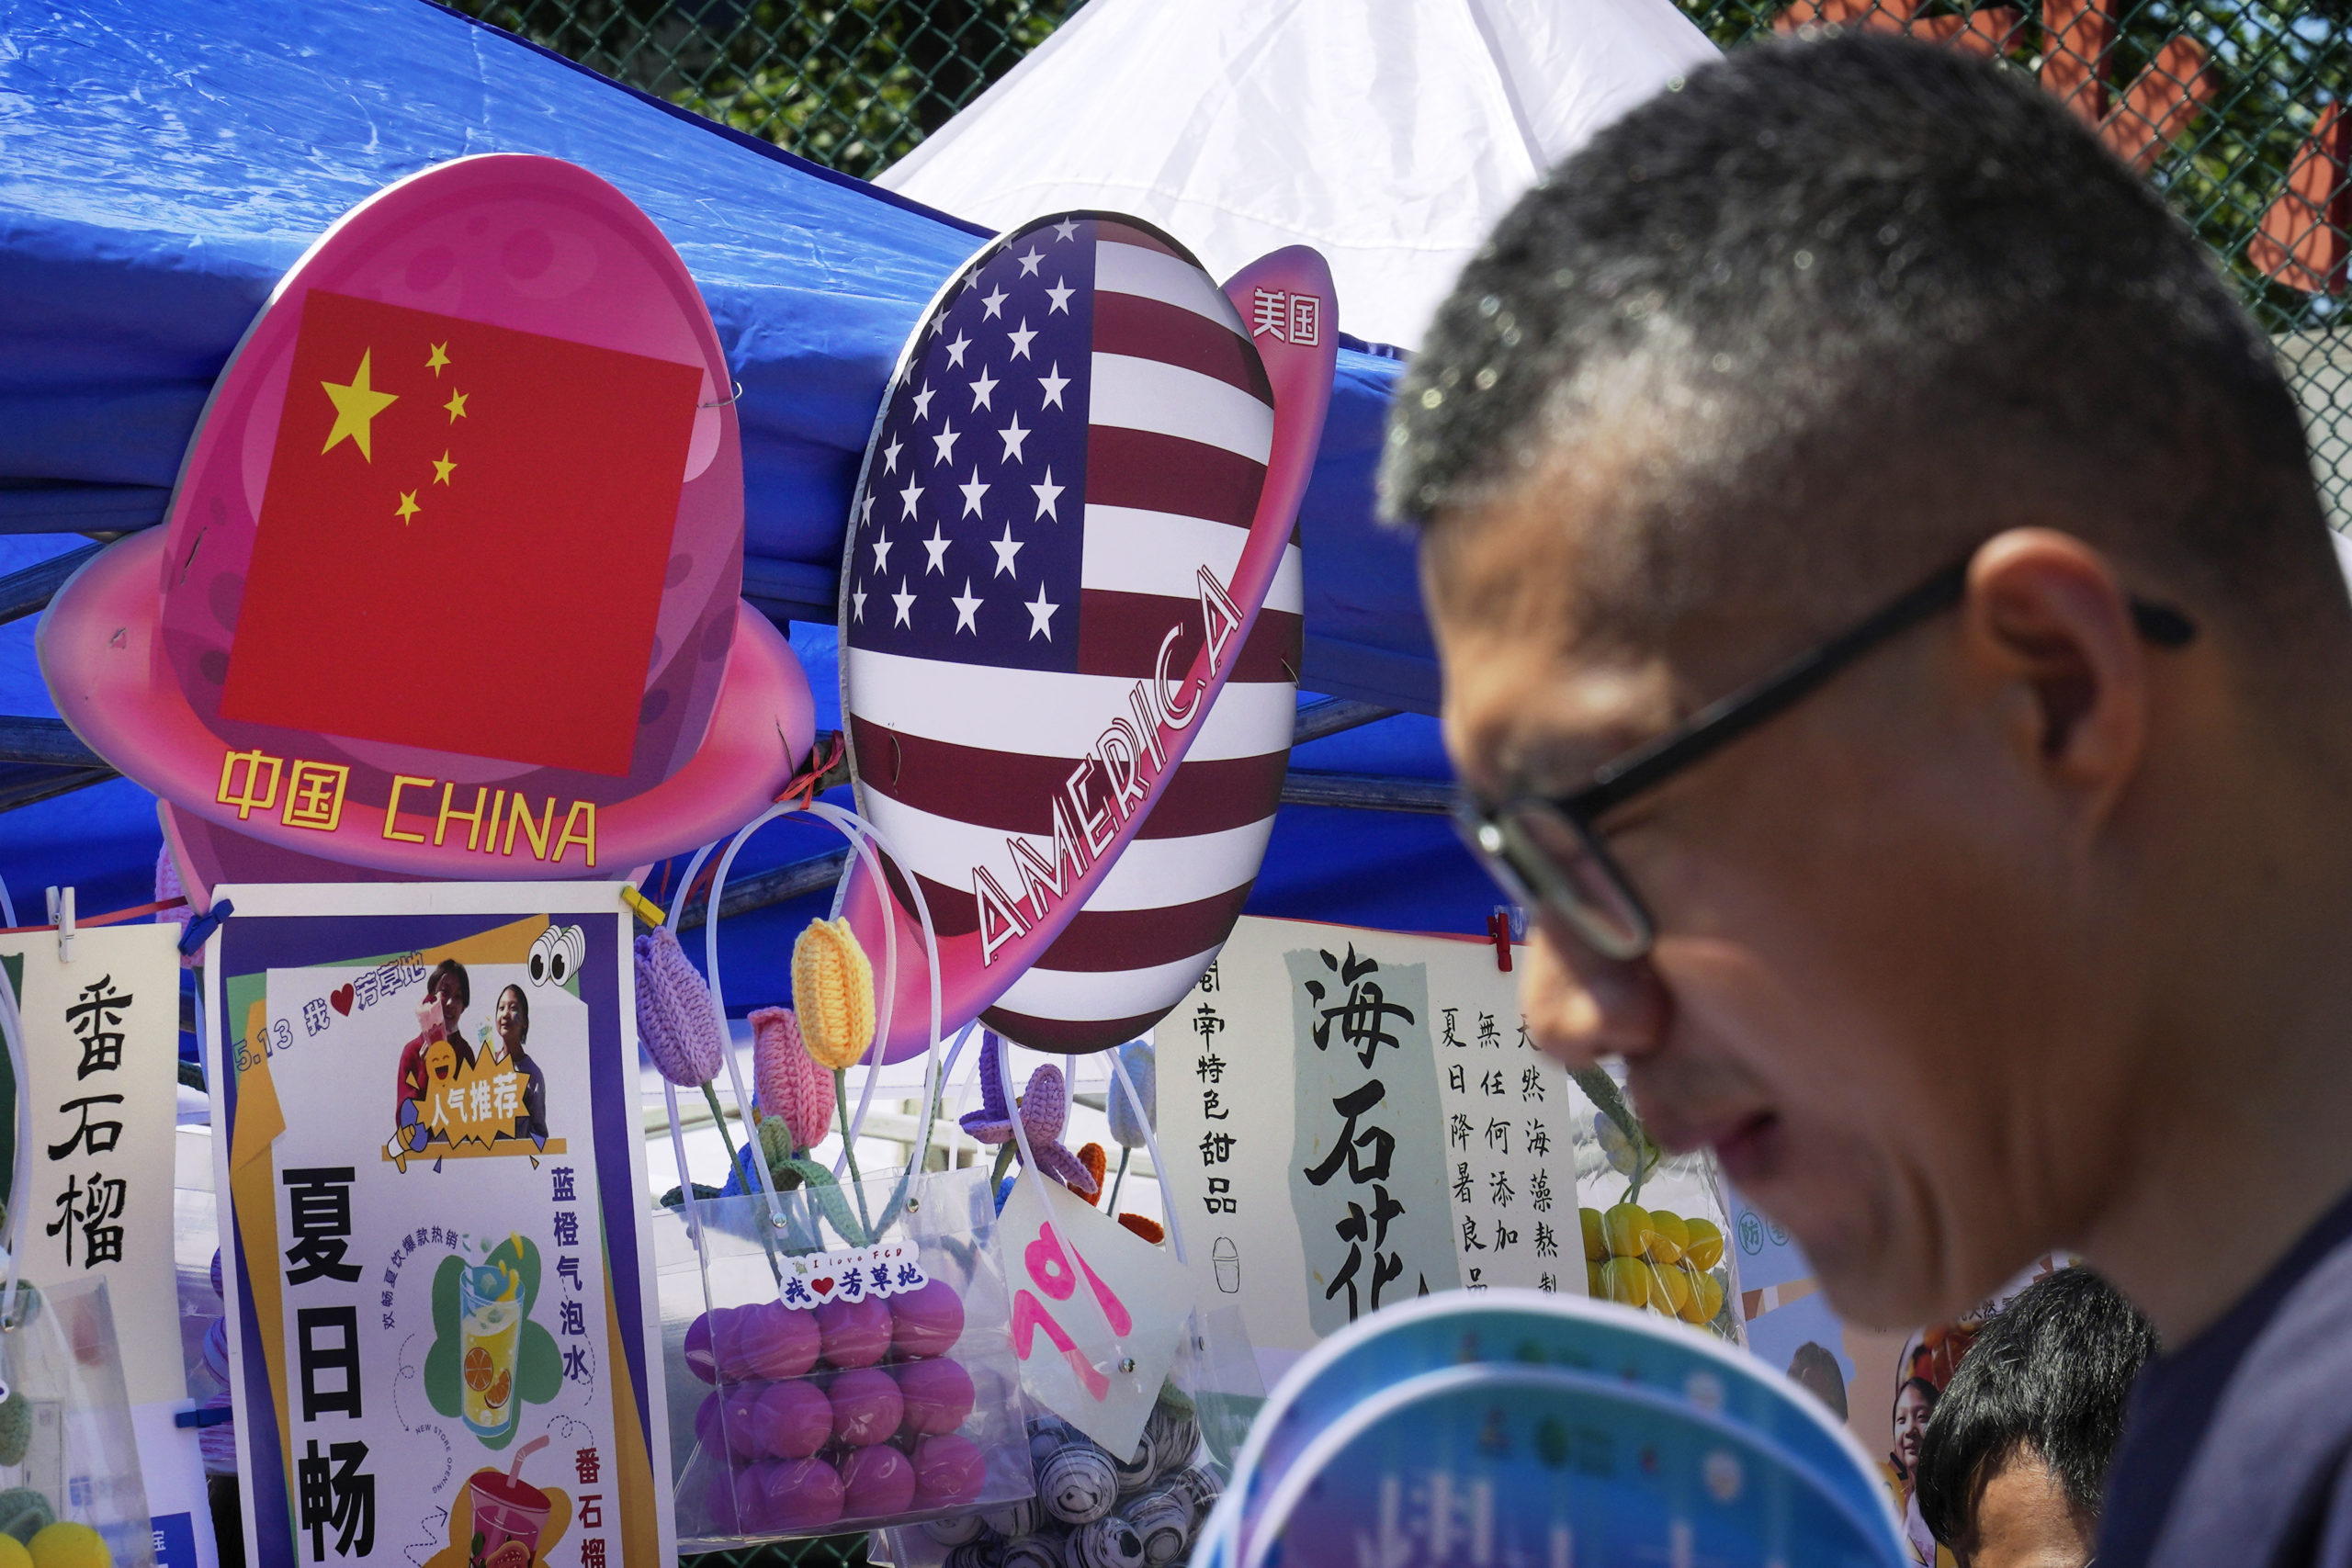 A man walks by a booth selling foods and beverages displaying planet-shaped flags of China and the U.S. during a spring carnival in Beijing on May 13. China has detained a worker from a military group on suspicion of spying for the CIA.